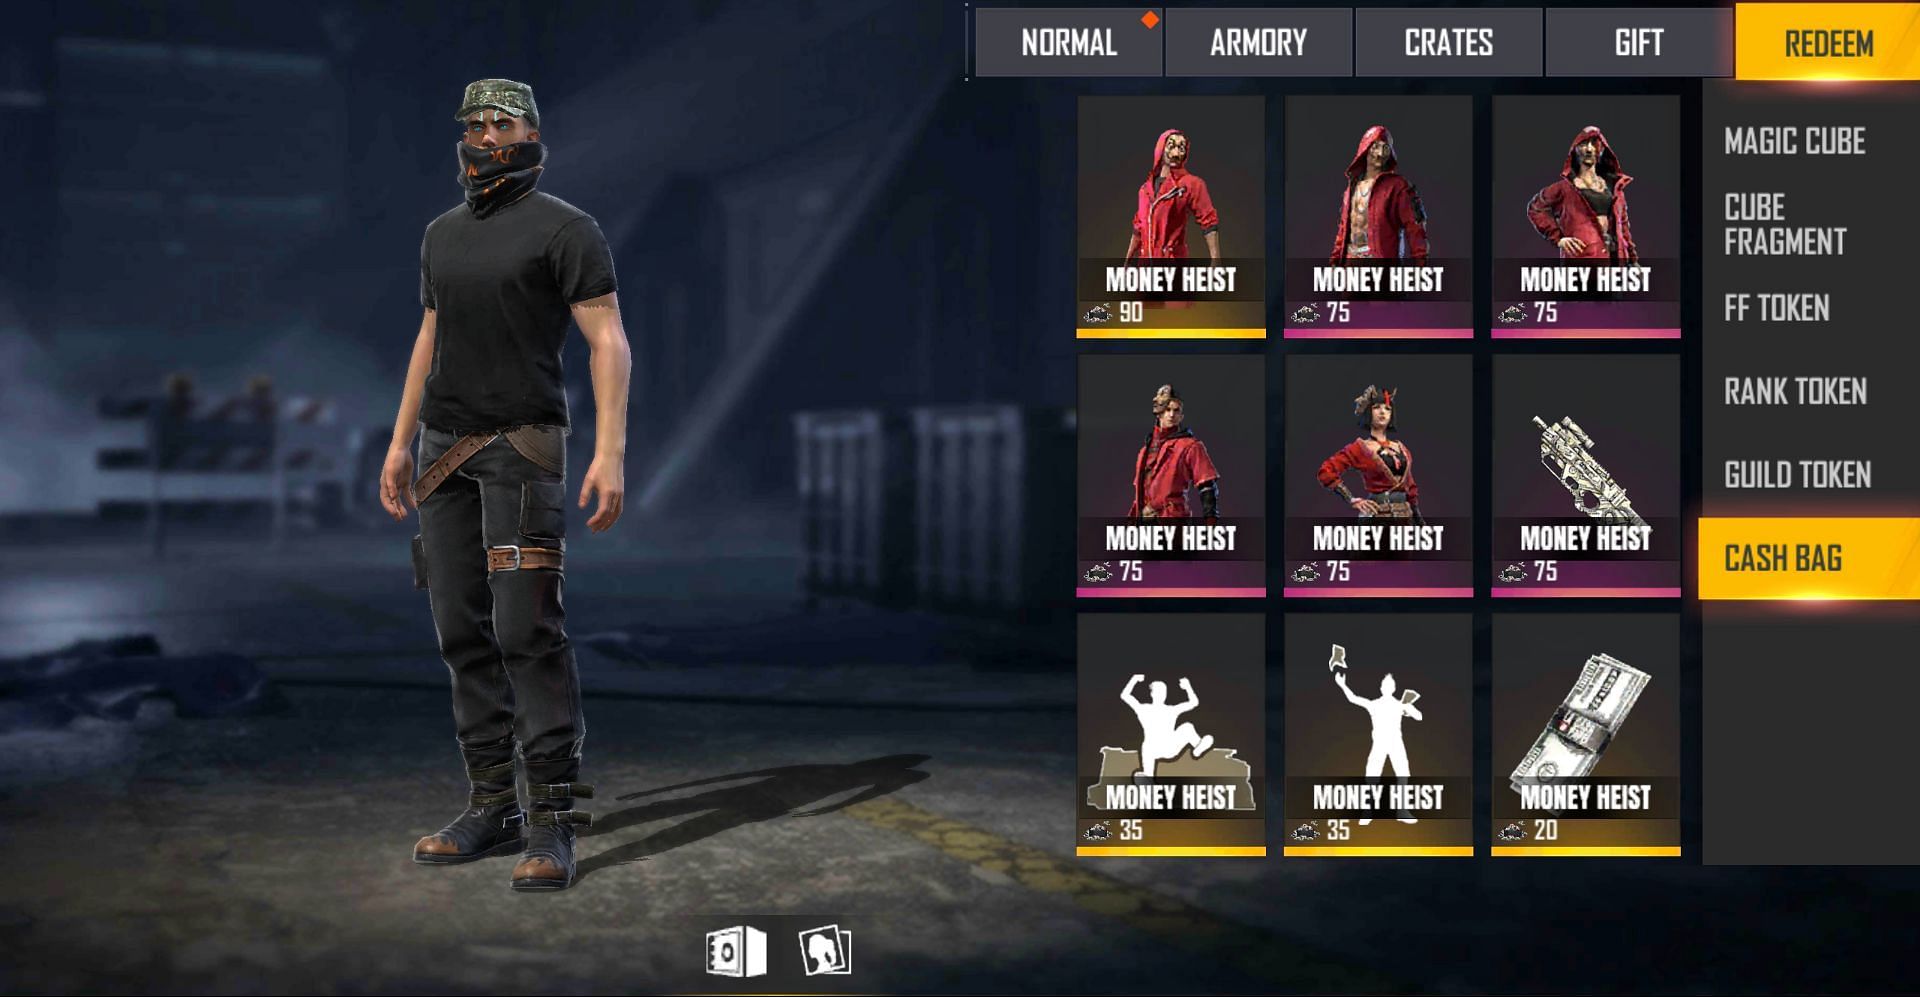 Users can exchange Cash Bag for several rewards (Image via Free Fire)